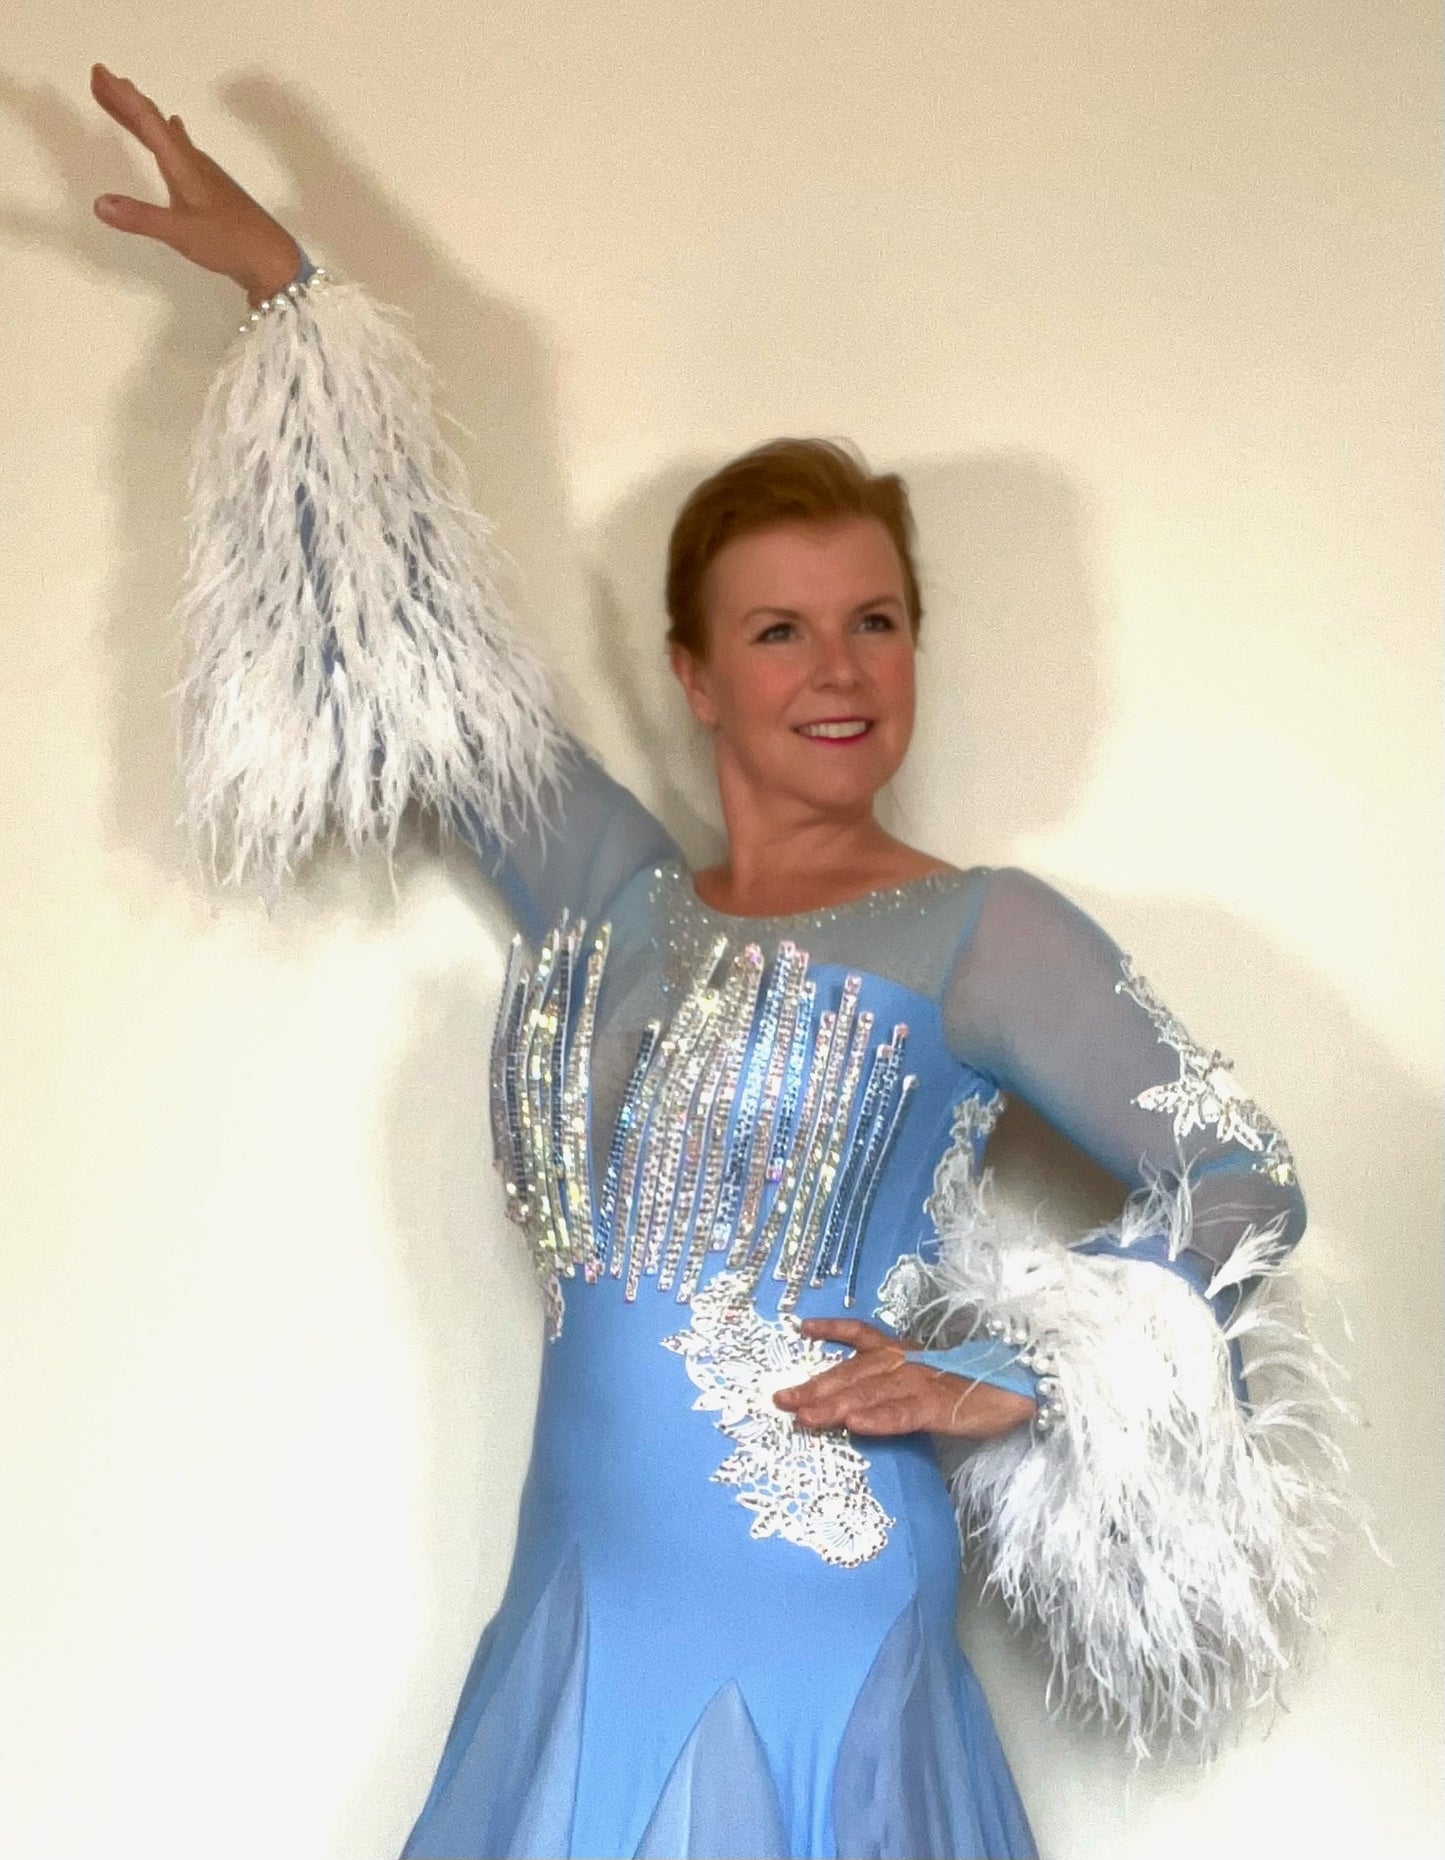 335 Cornflower Blue & White Ballroom Dress. Rigid detailing to the chest and lower back with white appliqué detail. White Ostrich feather detached cuffs. Stoning in light Saphire & AB.